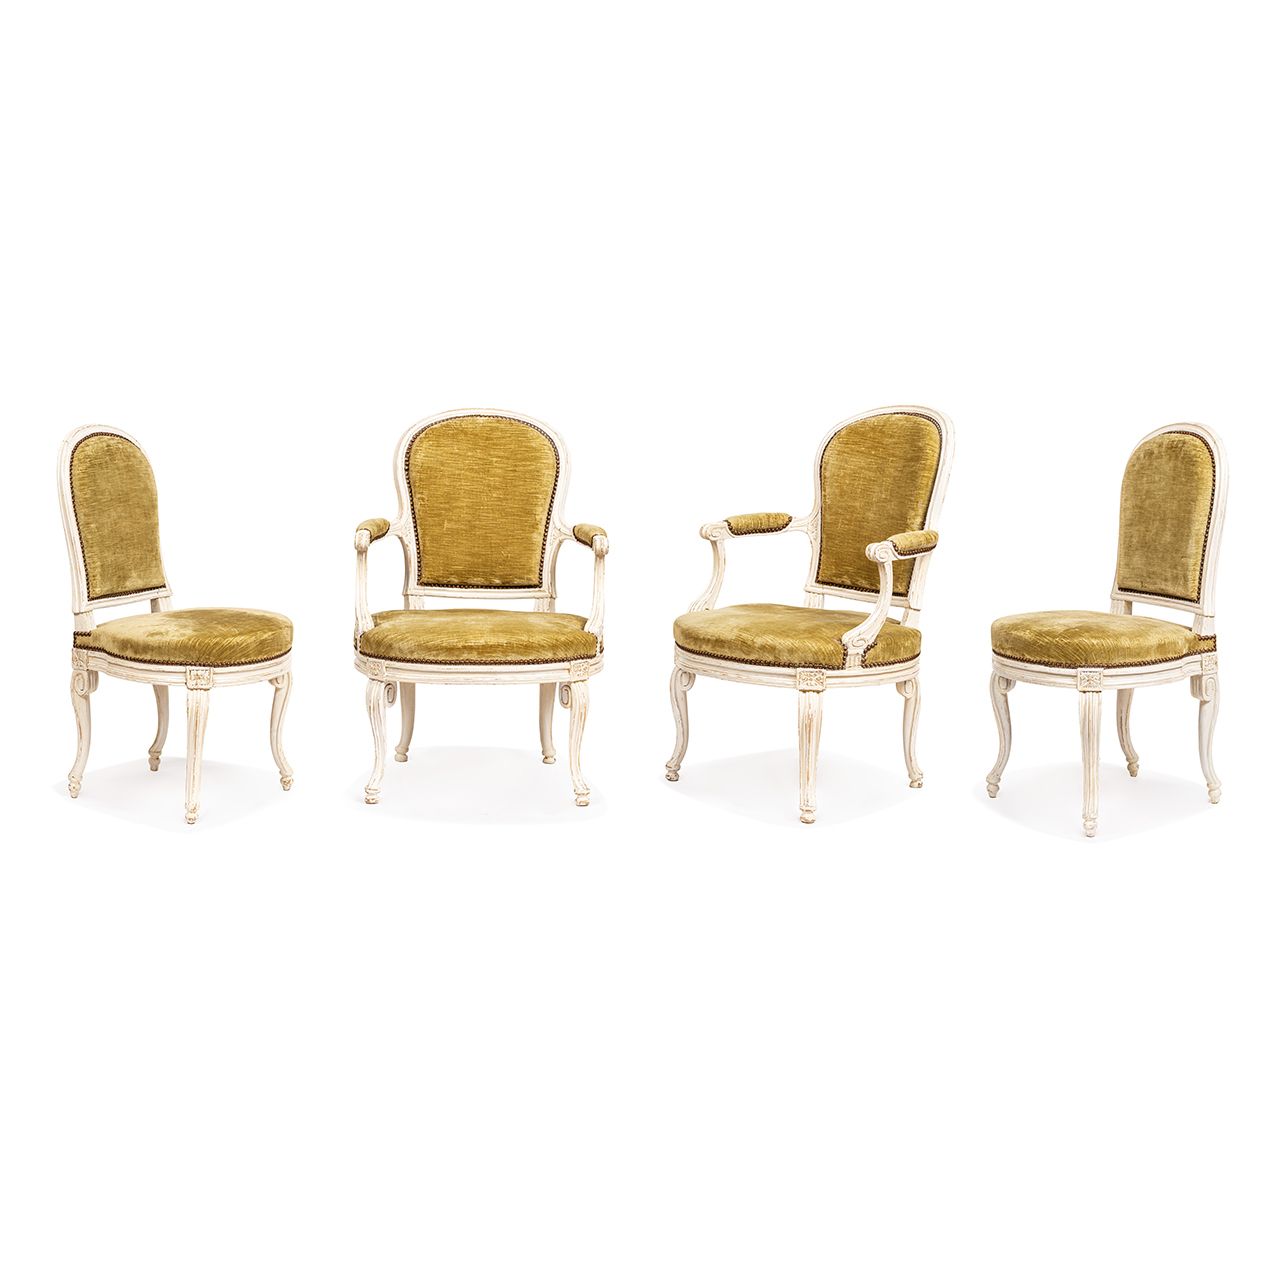 The Difference between Louis XV and Louis XVI style chairs 